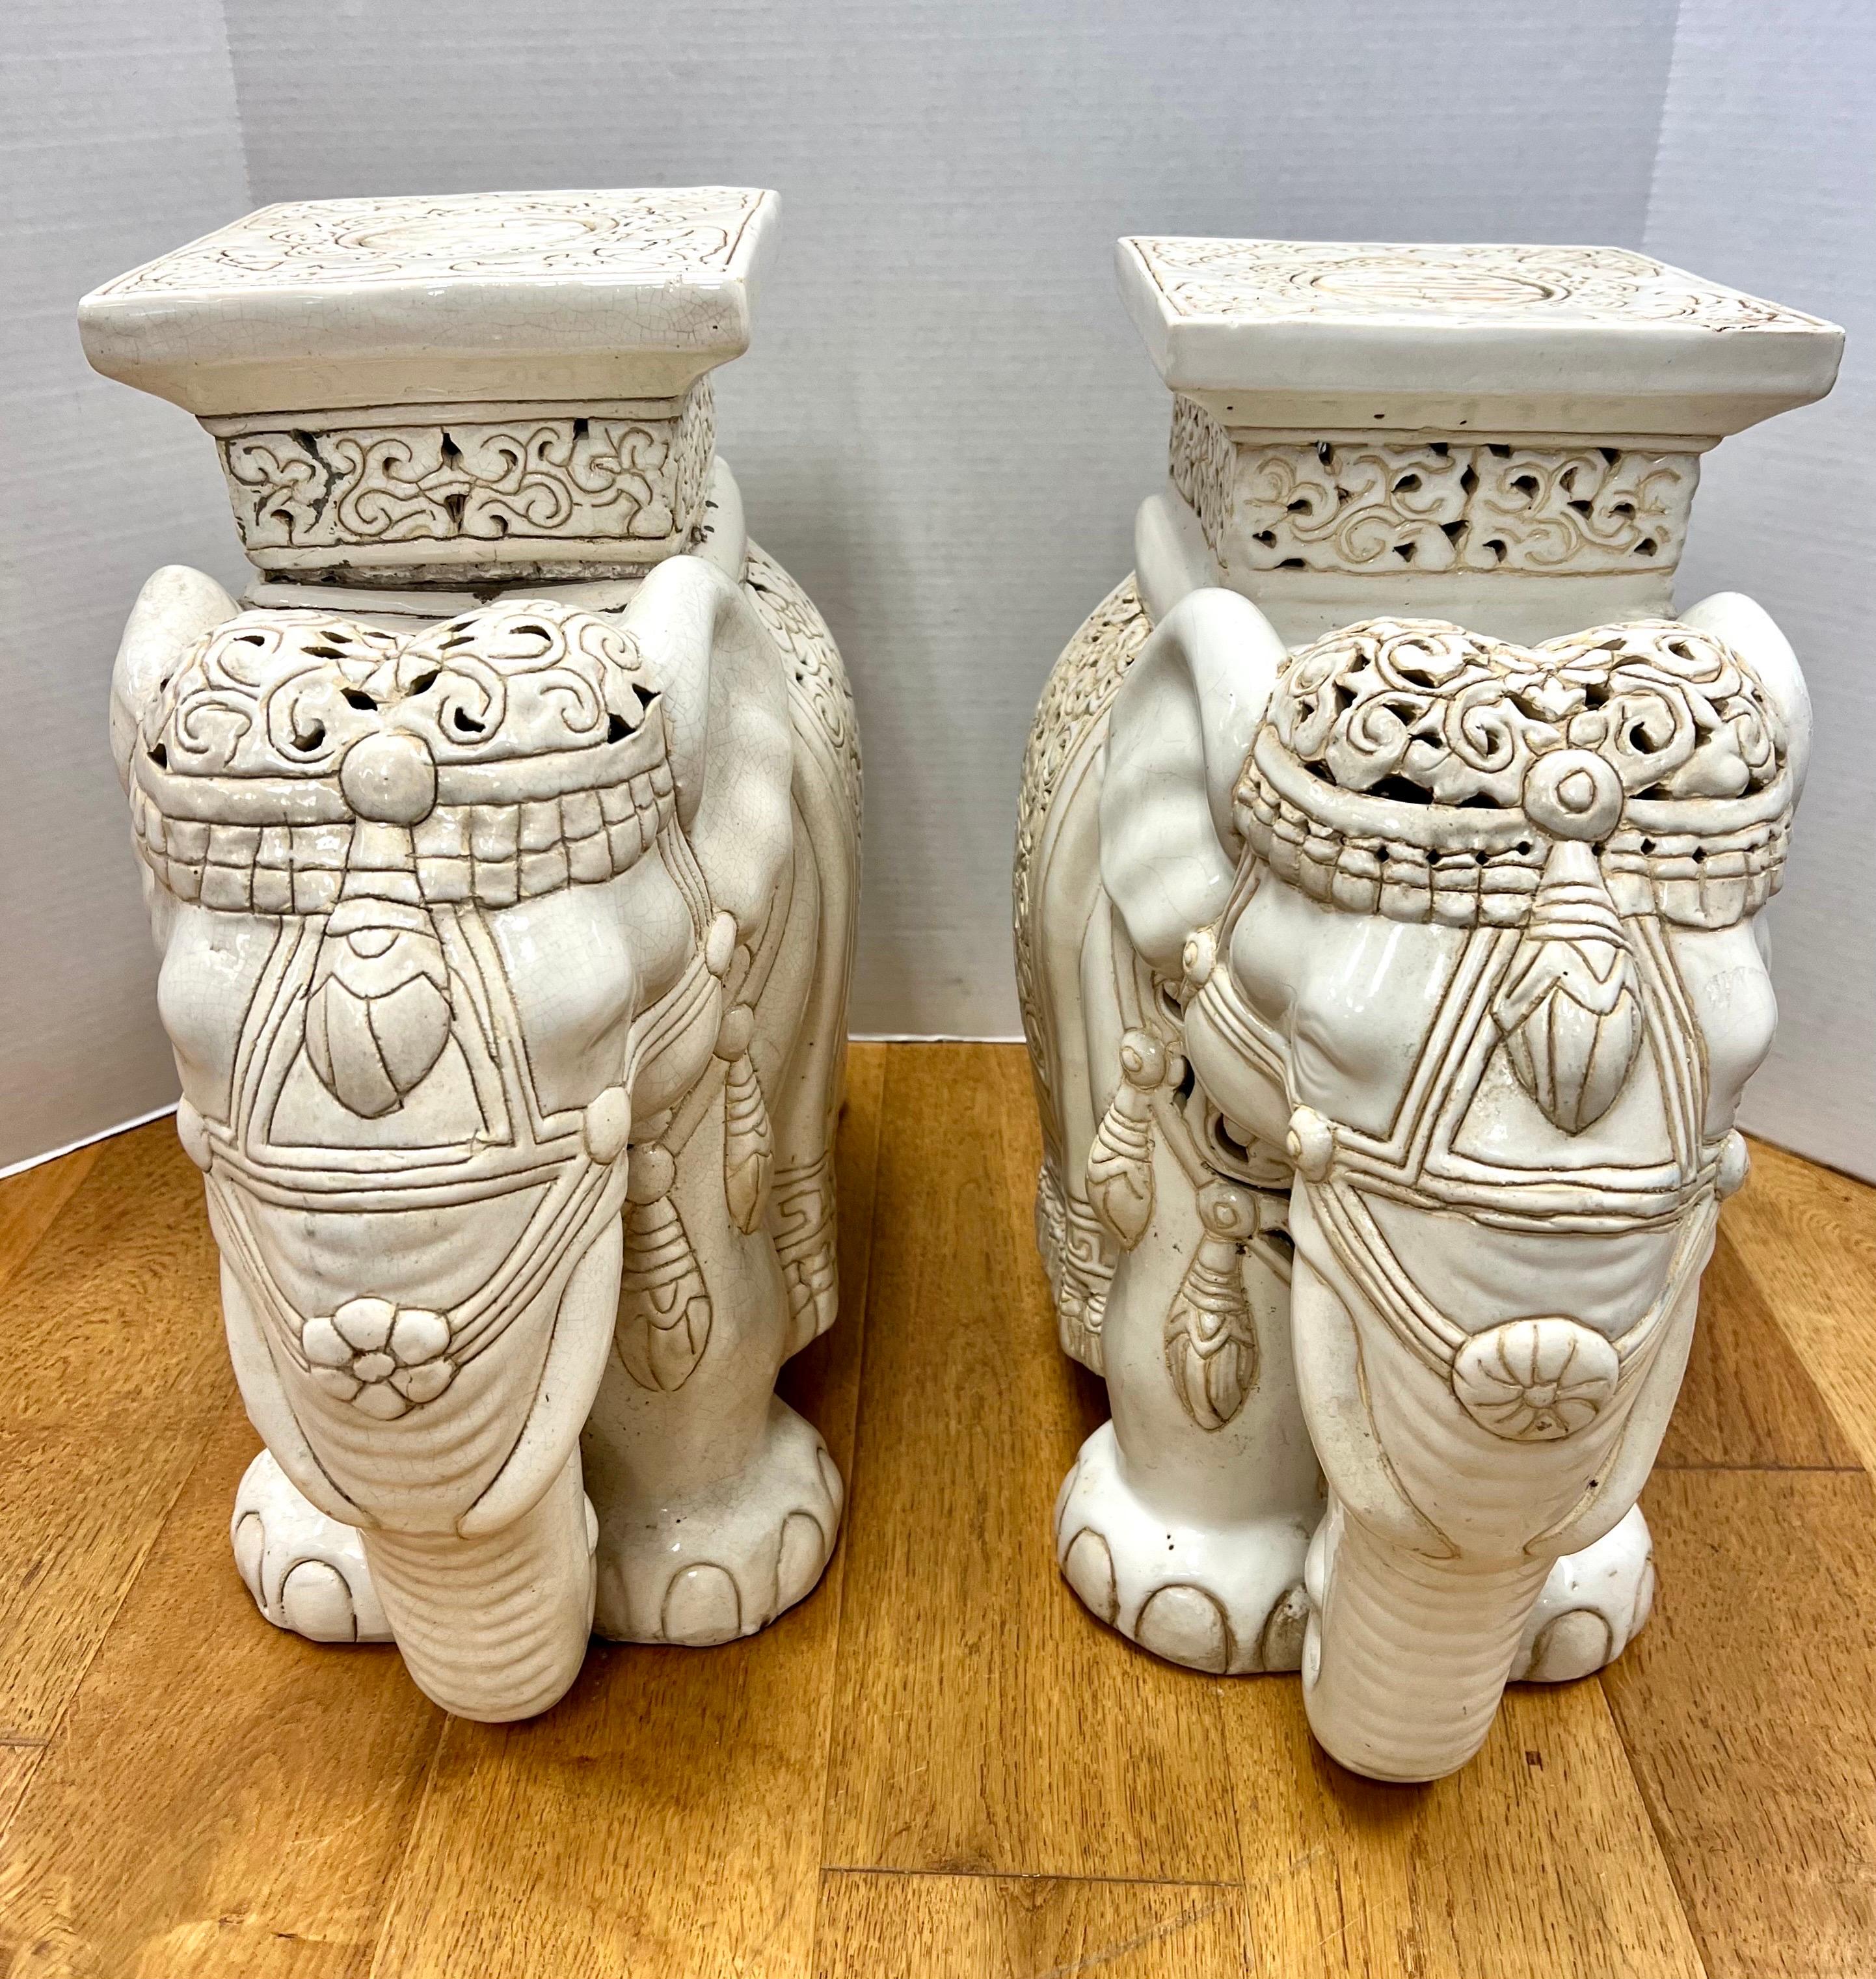 Vintage pair of chinoiserie style white elephant ceramic garden stools with intricate carved detail all around. Use as a garden seat, plant stand or small table.
Whatever you do, own the best!